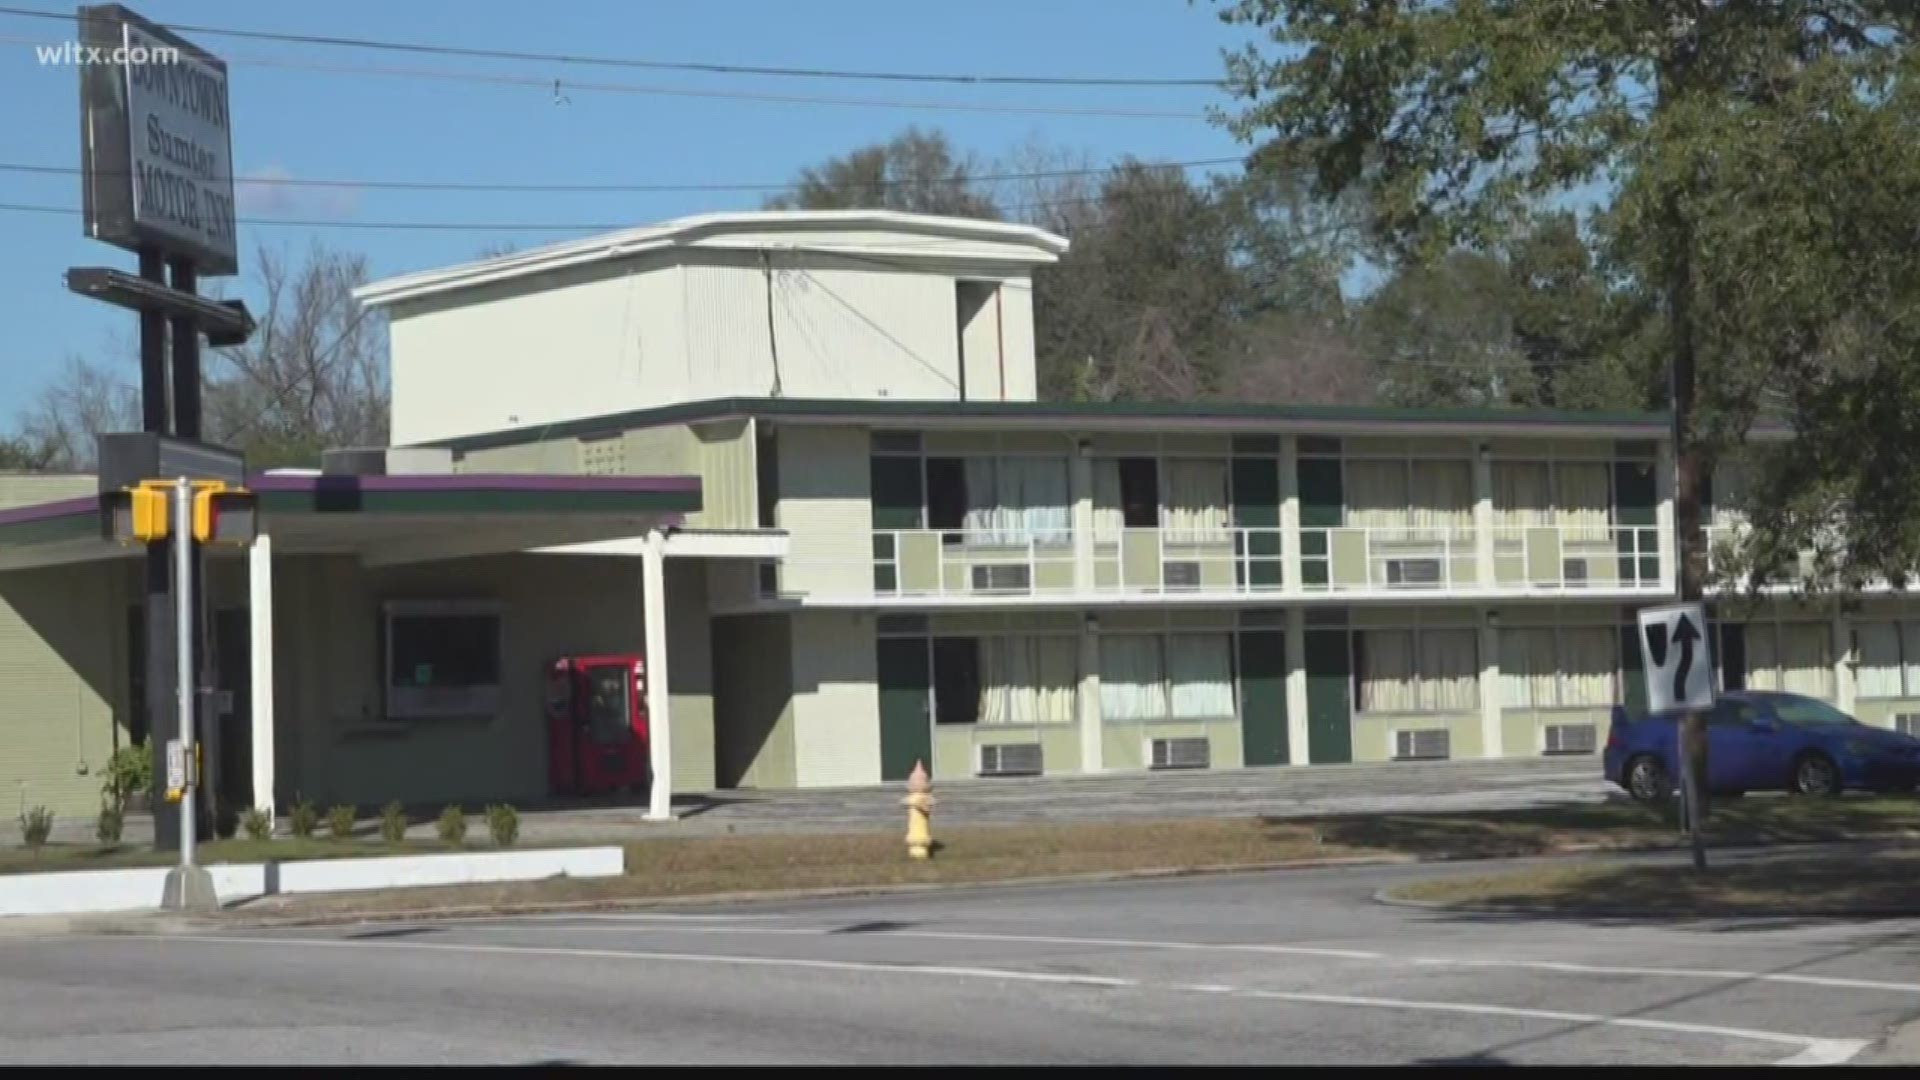 Sumter Police say this was the result of domestic violence and happened at the Sumter Motor Inn shortly before 1 am.